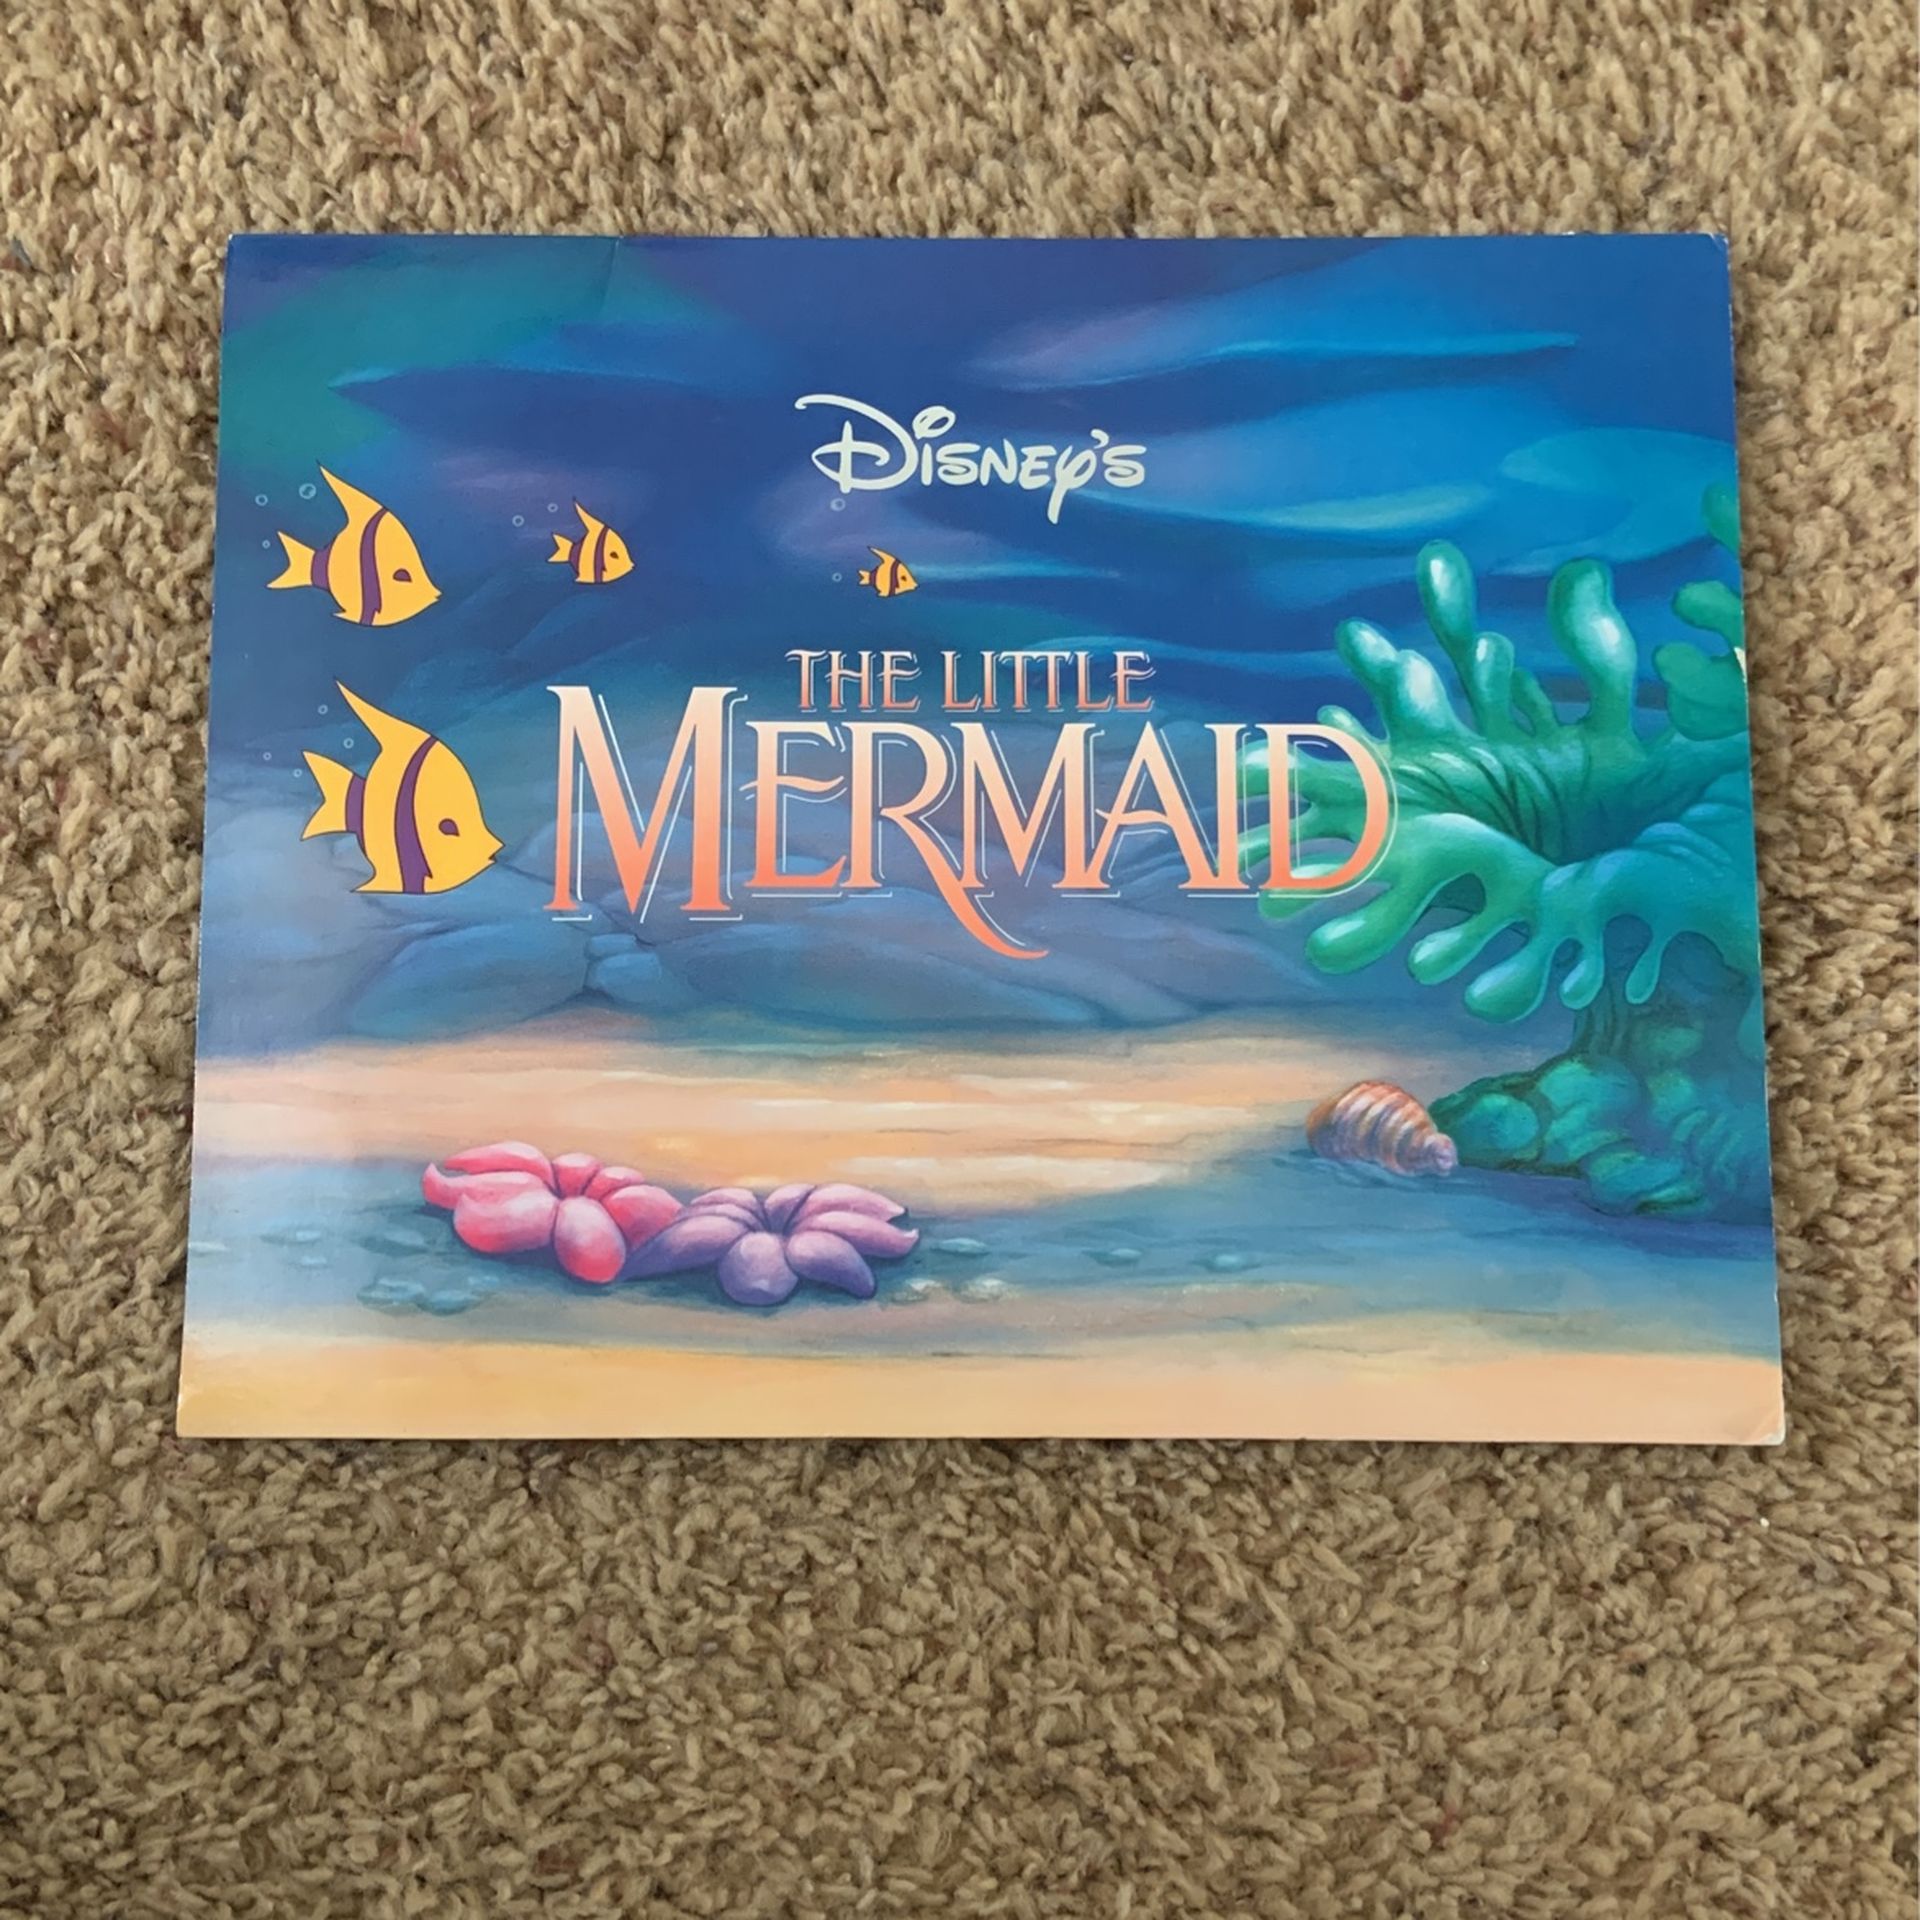 For little Graham portfolio Disney suitable for framing featuring art from the little mermaid